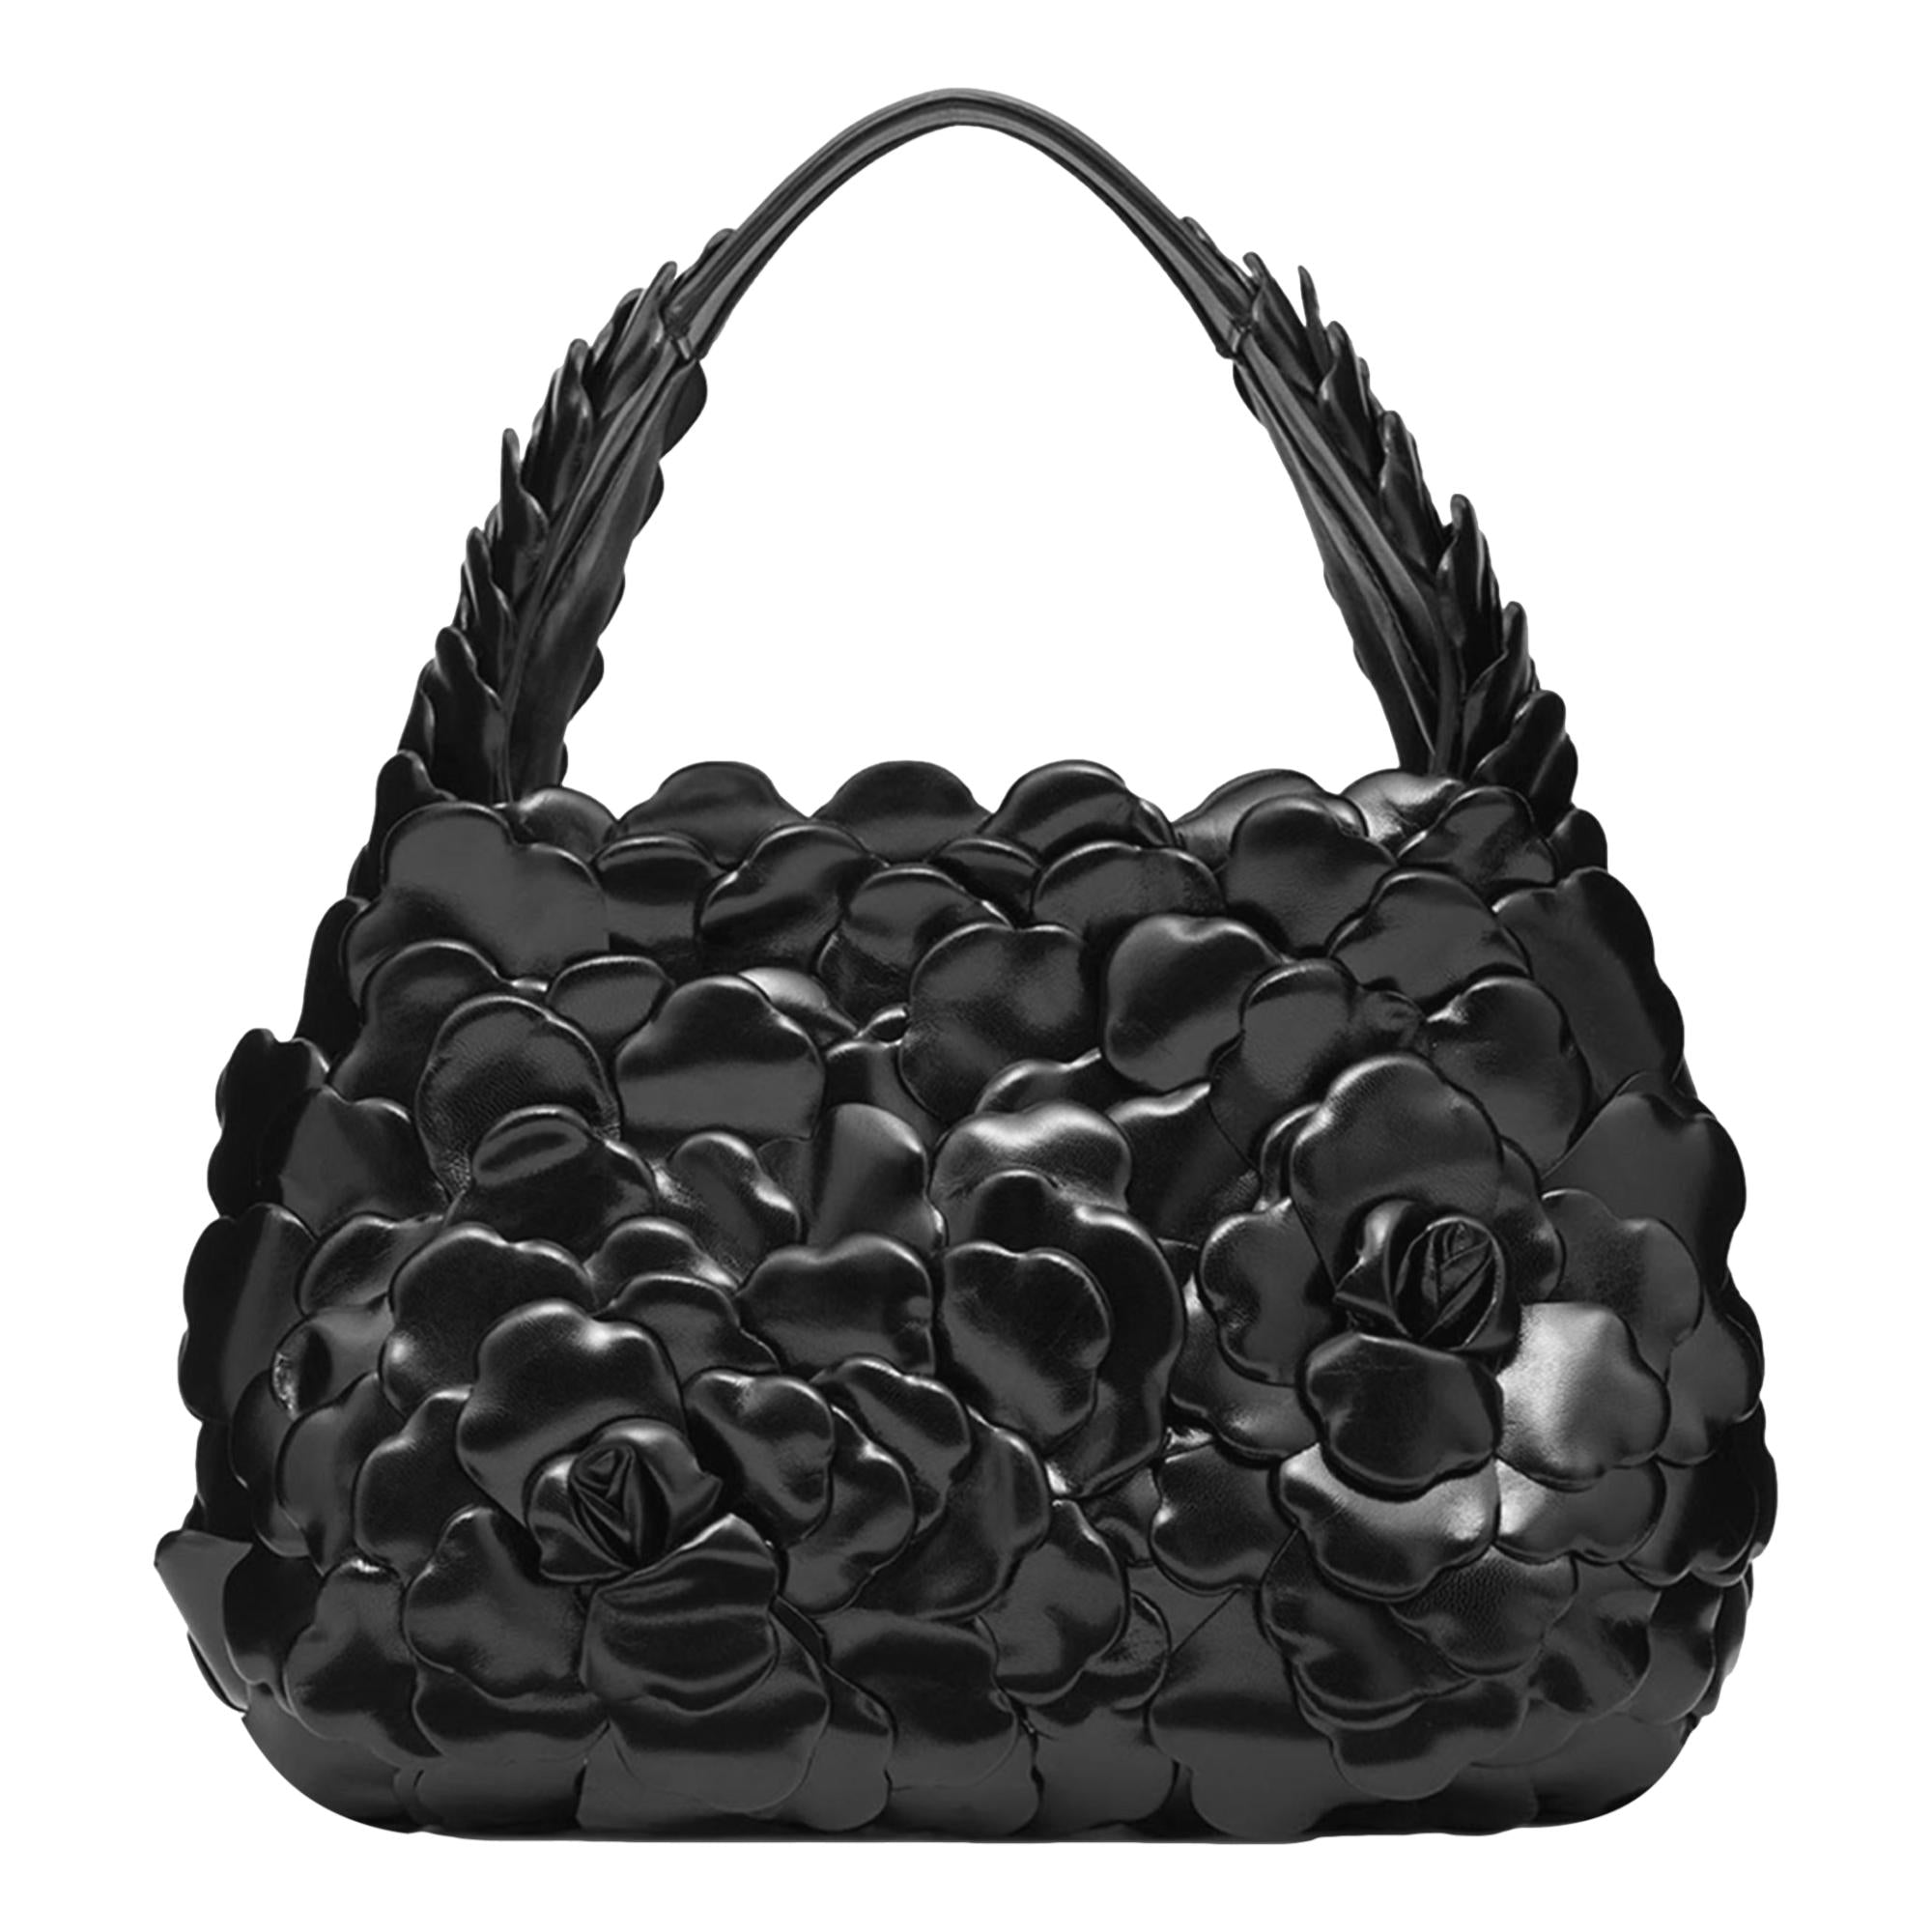 Valentino Garavani Atelier Bag 03 Black Oro Rose Edition Small Hobo Bag at_Queen_Bee_of_Beverly_Hills